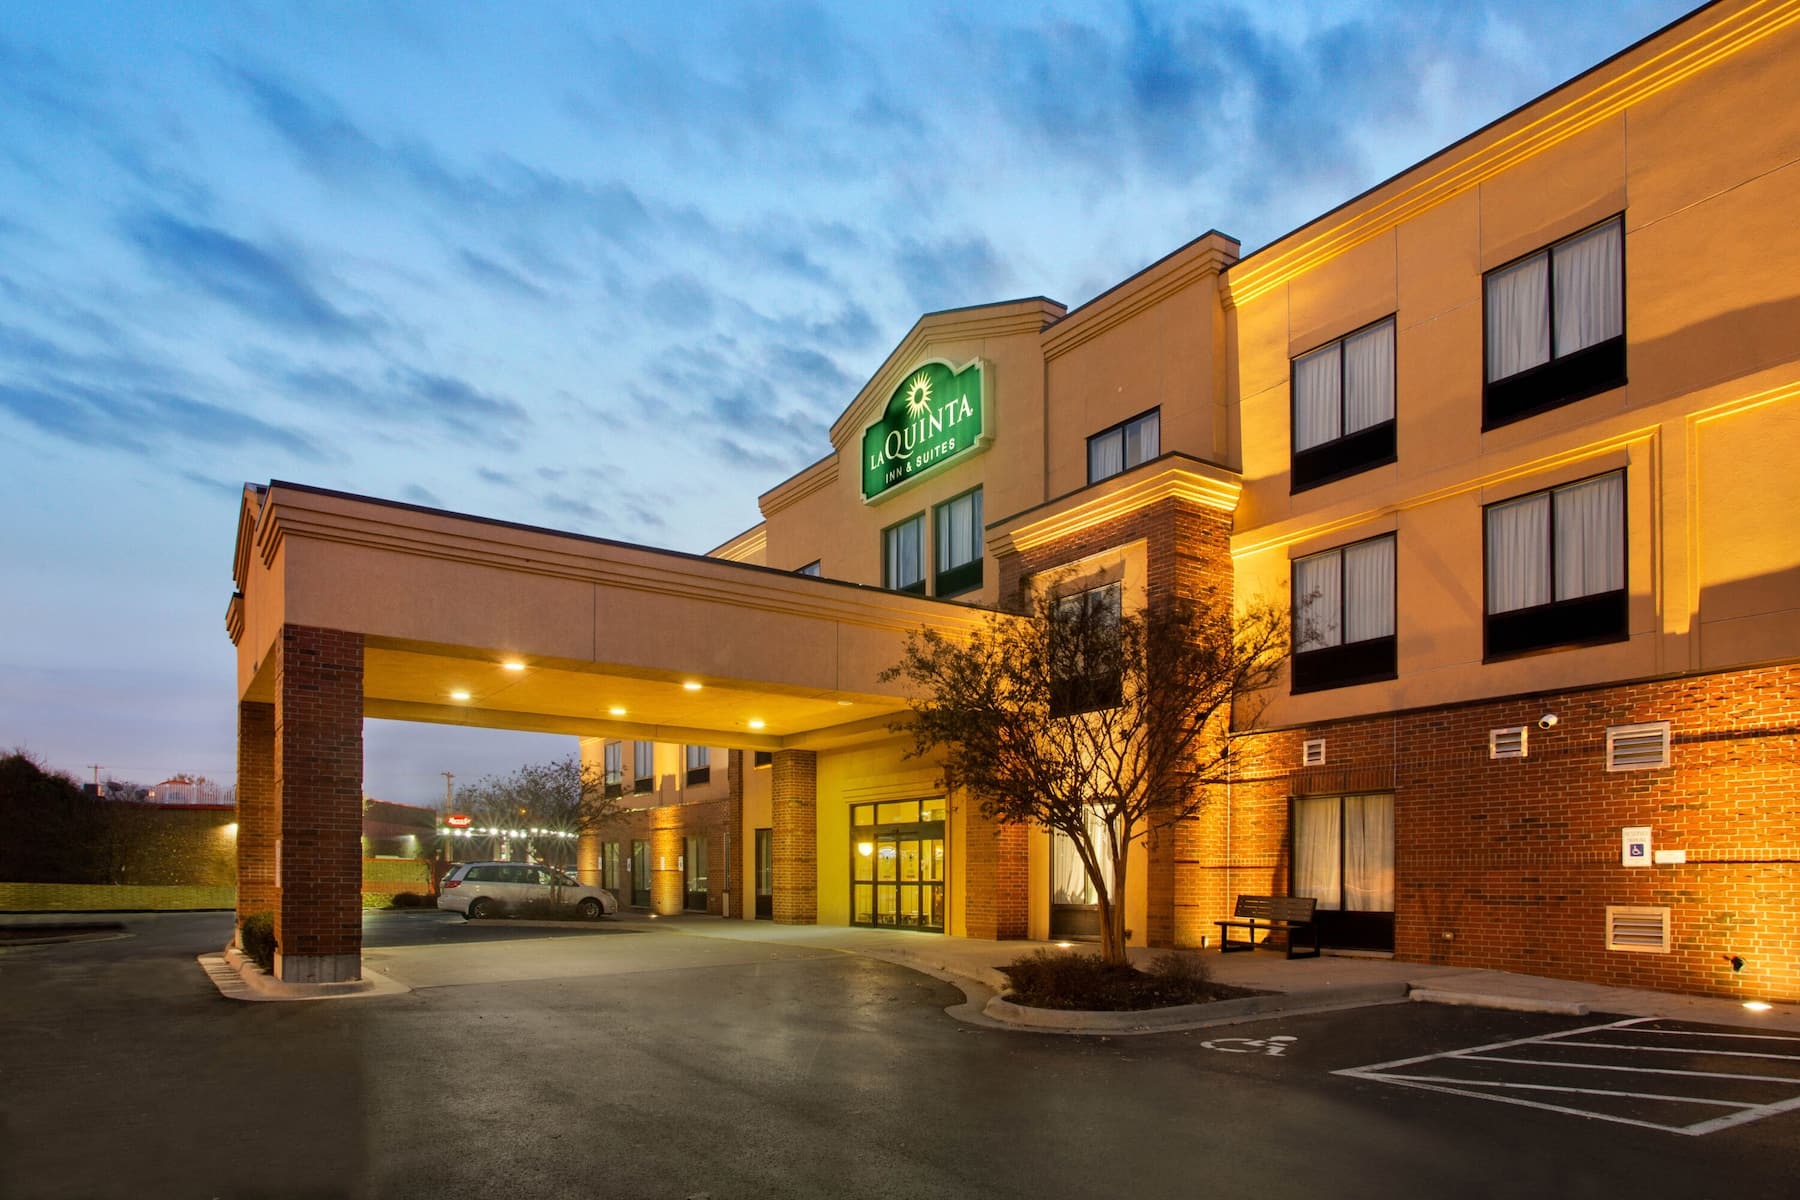 Photo of La Quinta Inn & Suites by Wyndham Springfield Airport Plaza, Springfield, MO